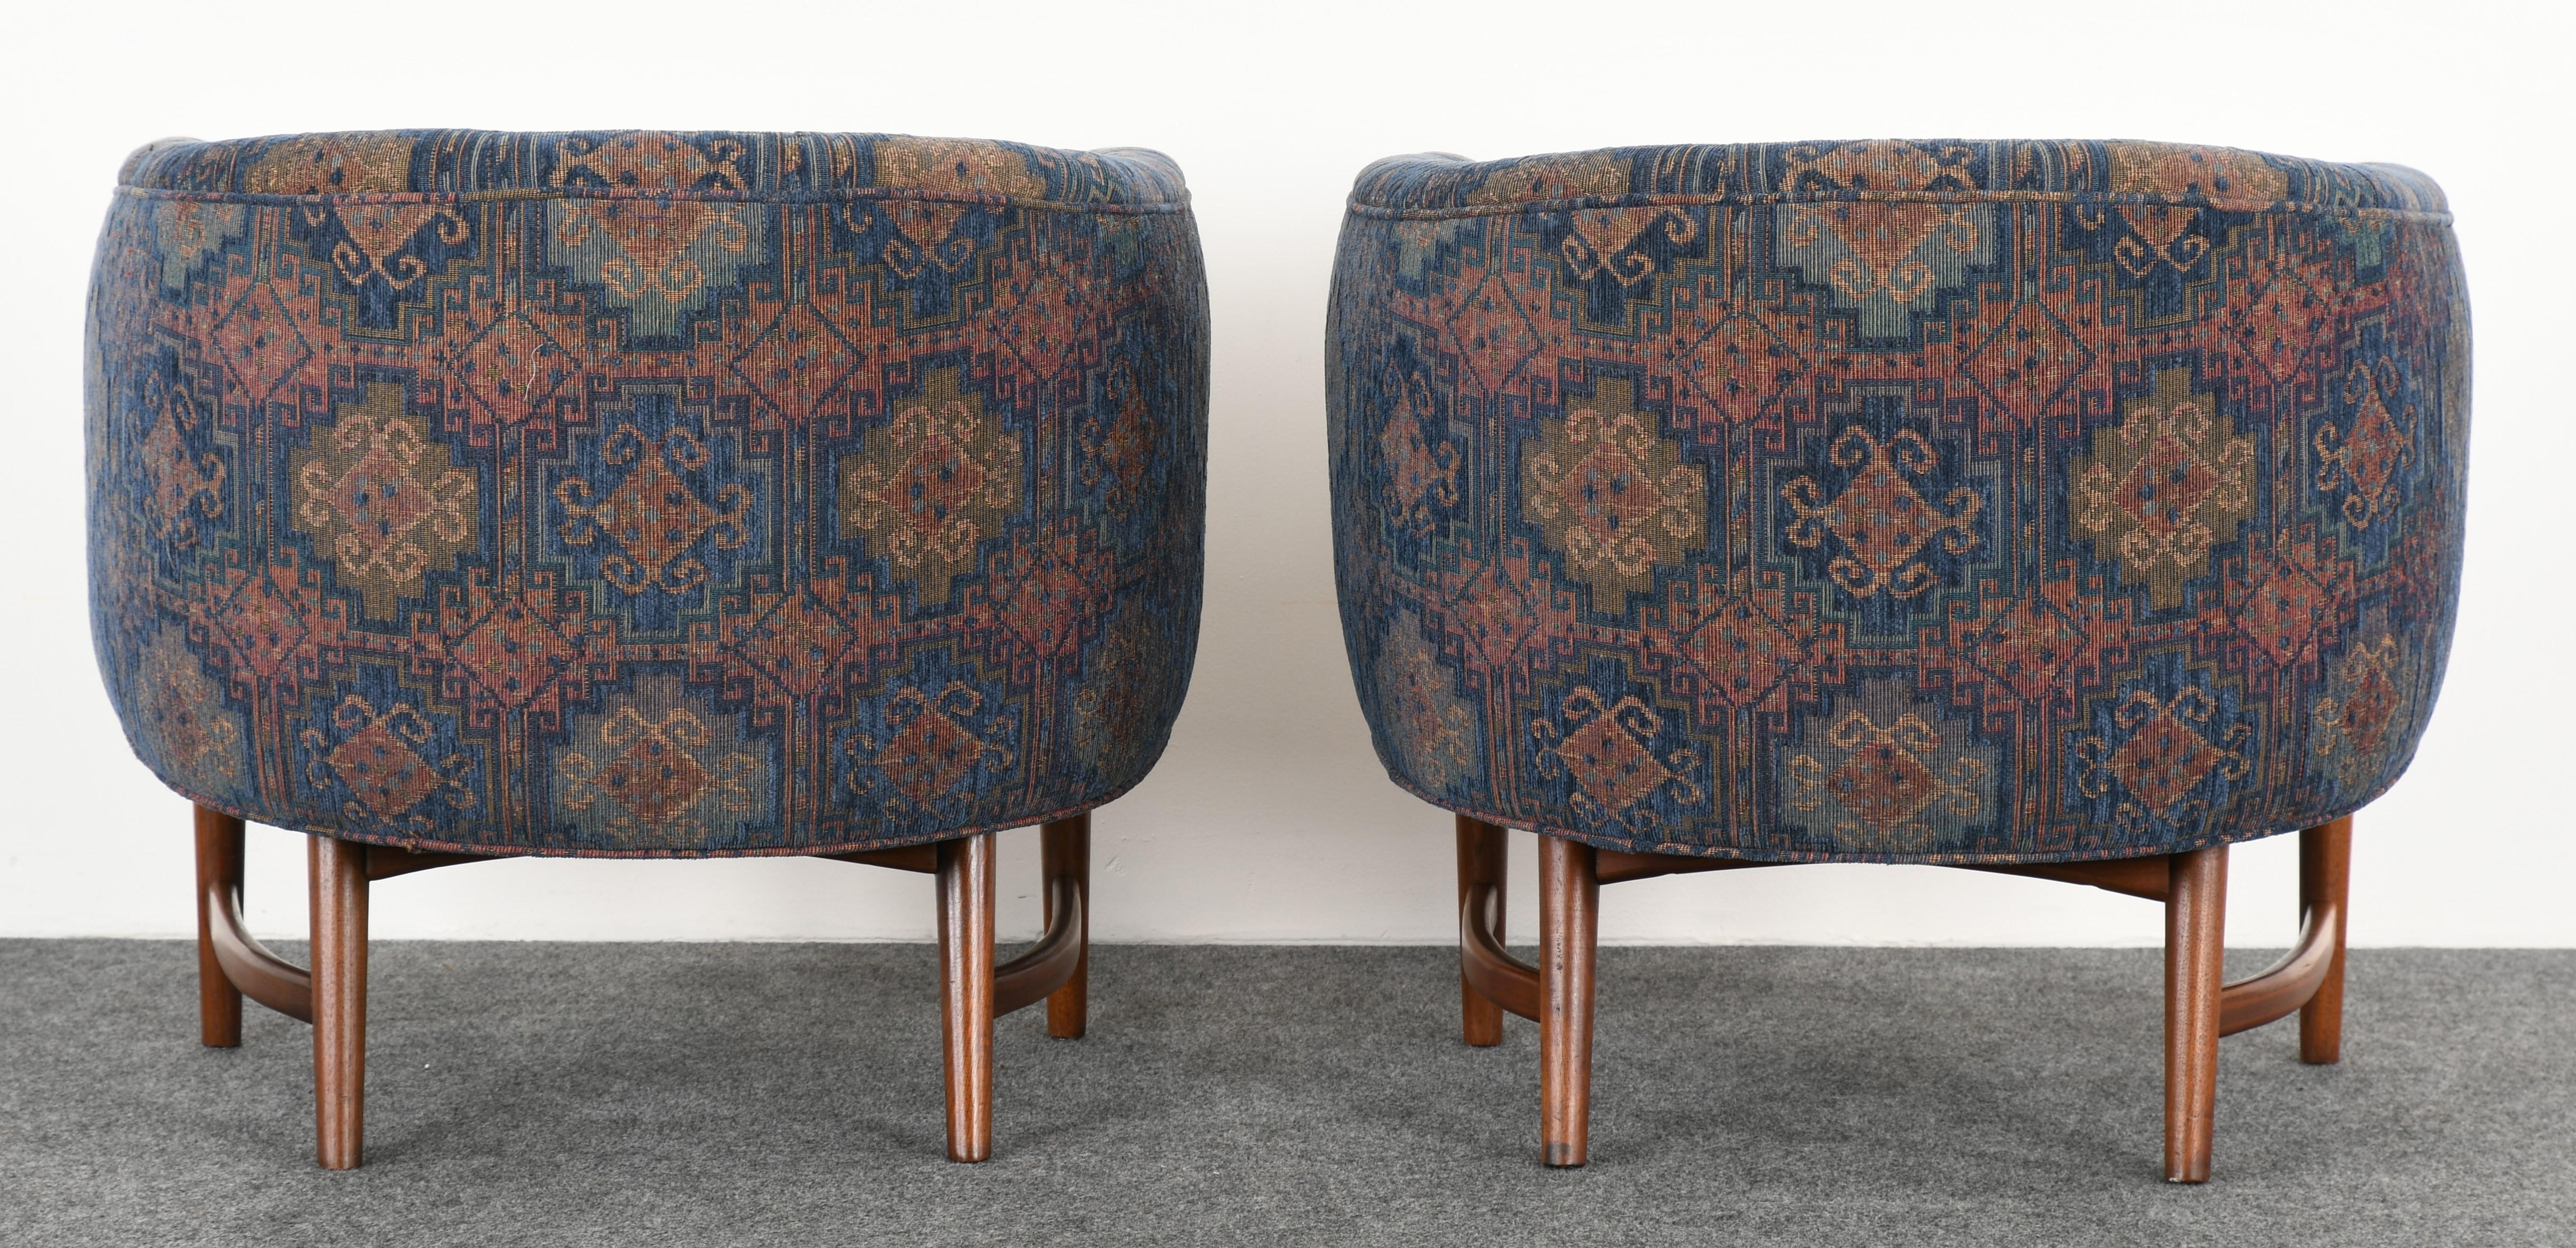 Mid-20th Century Pair of Milo Baughman Barrel Back Lounge Chairs, 1960s